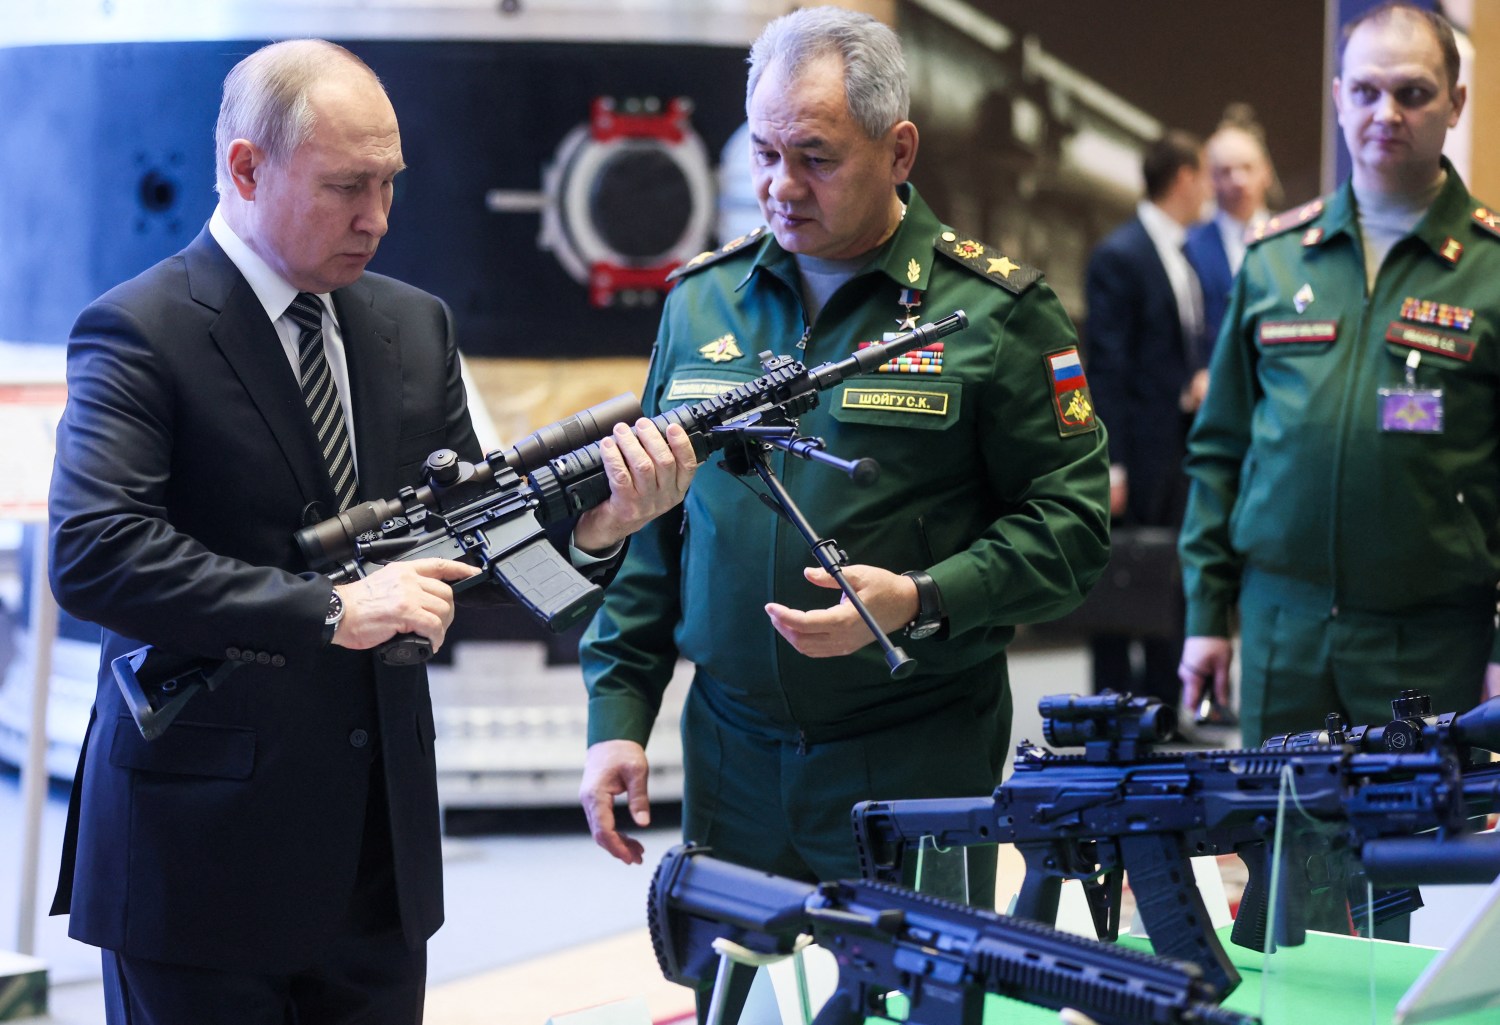 Russian President Vladimir Putin and Defence Minister Sergei Shoigu attend a military exhibition before an expanded meeting of the Defence Ministry Board in Moscow, Russia December 21, 2021. Sputnik/Mikhail Metzel/Pool via REUTERS